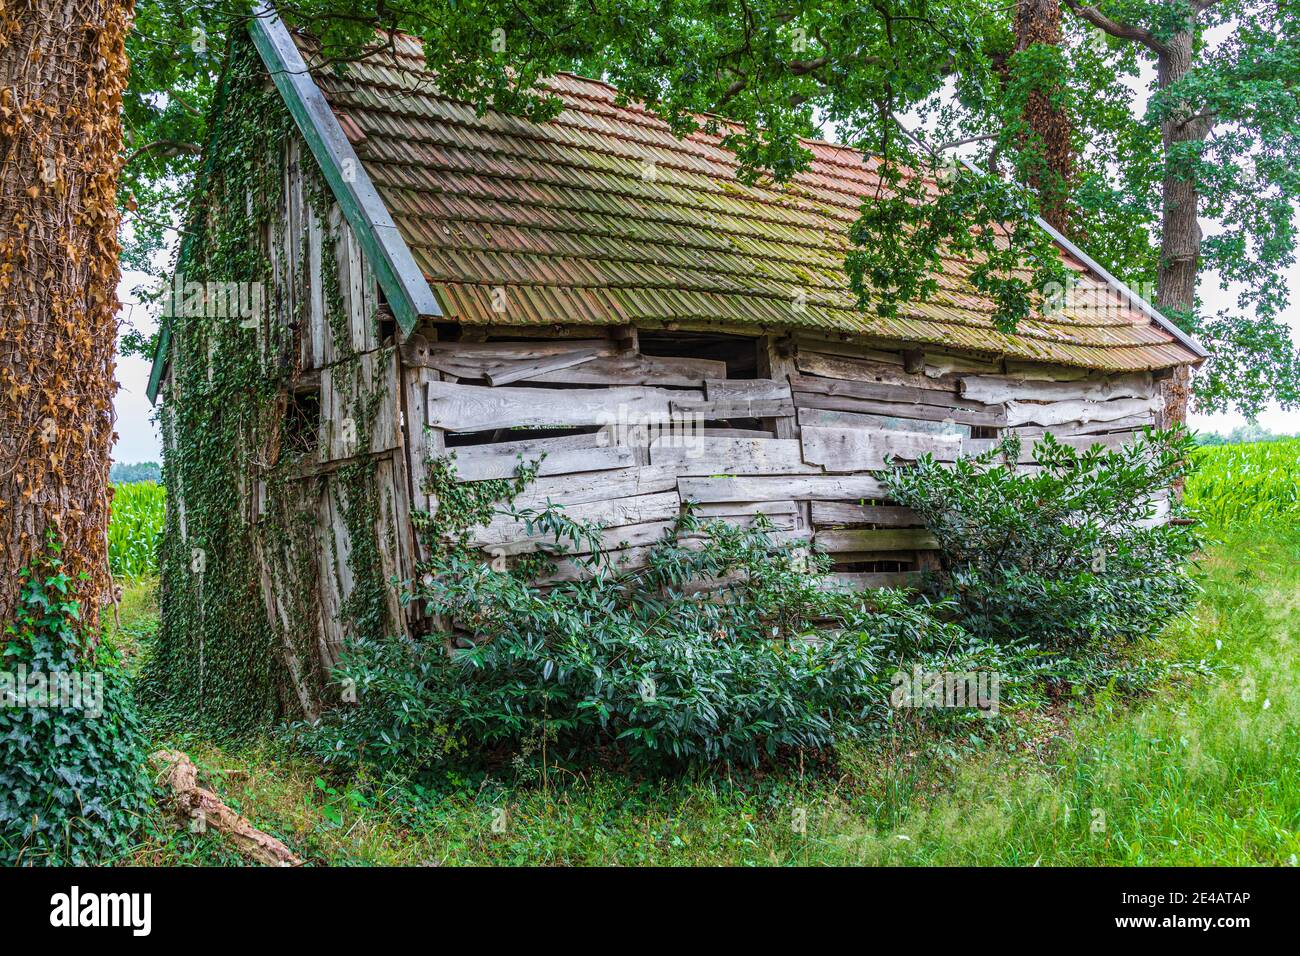 Old wooden barn Stock Photo